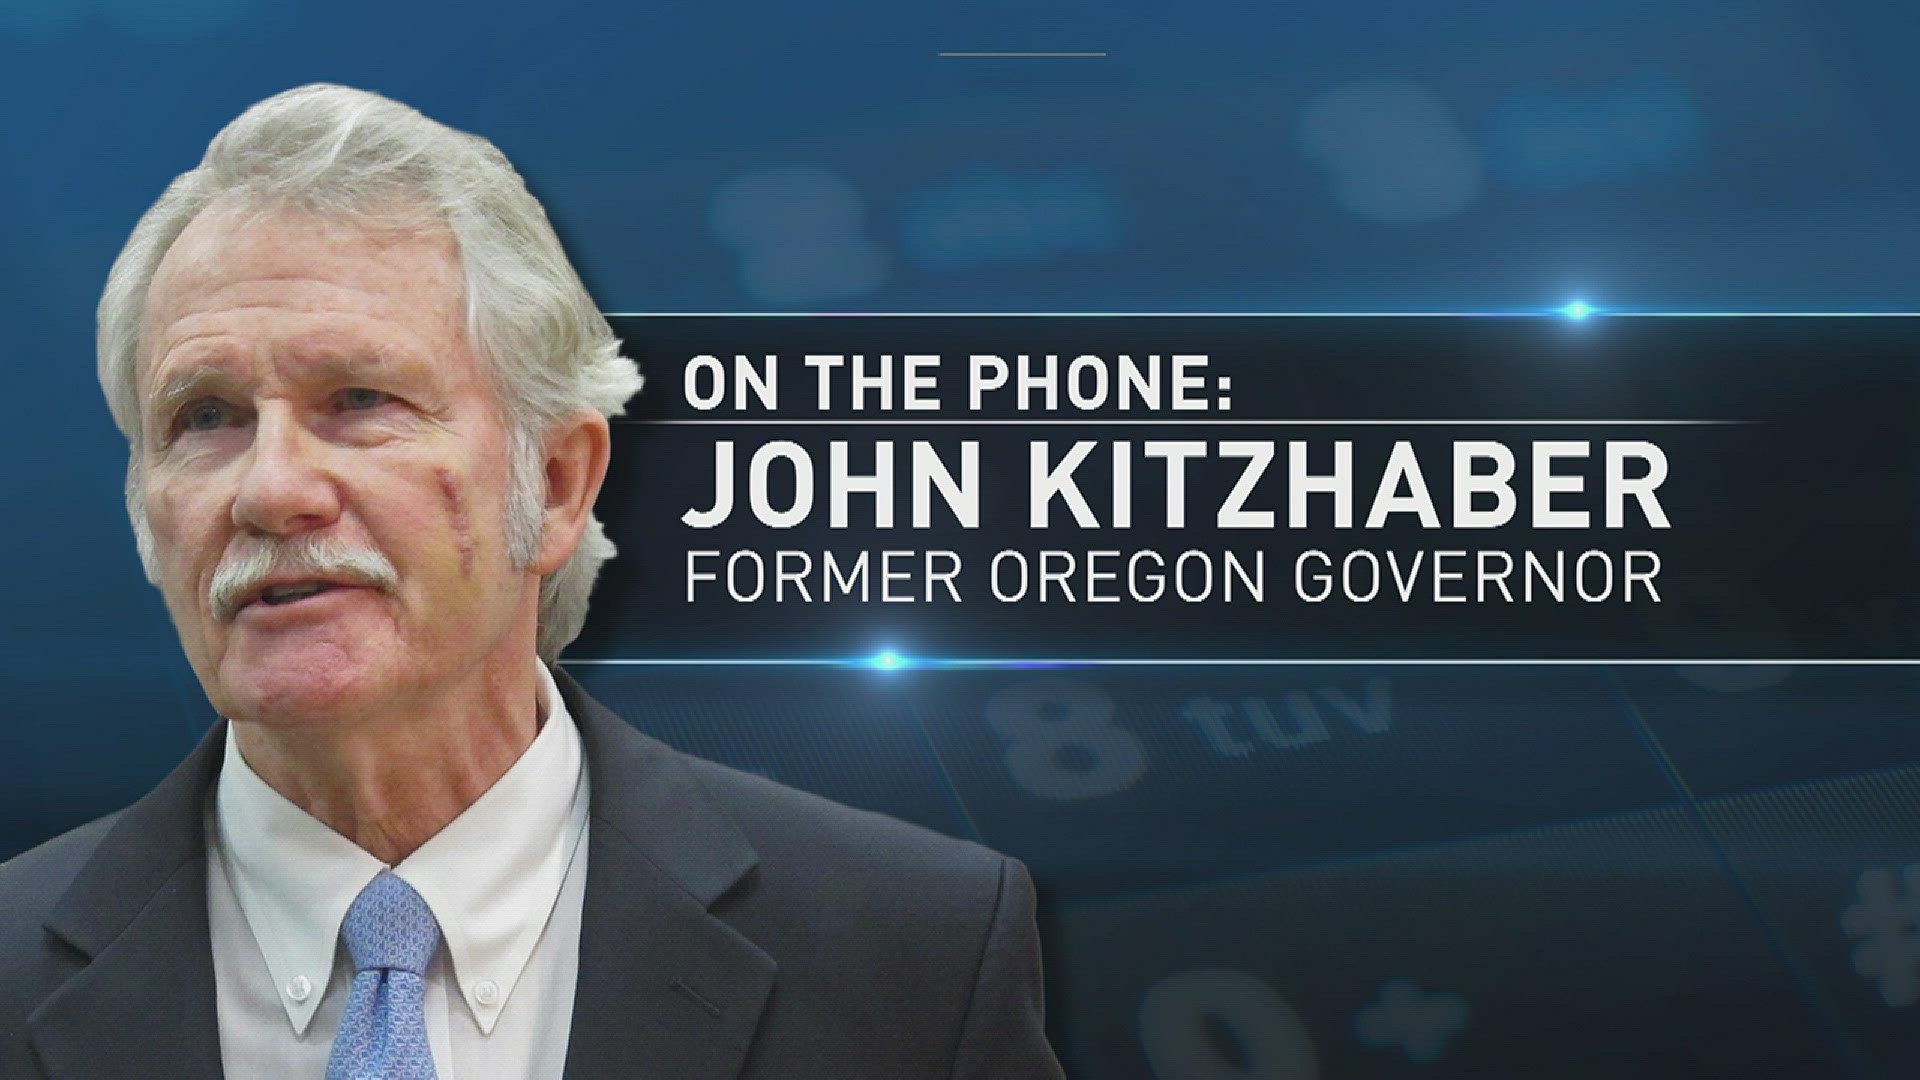 Former Oregon Gov. John Kitzhaber says he feels 'vindicated' by the federal government's decision not to file criminal charges against him or his fiancee Cylvia Hayes in their corruption probe.